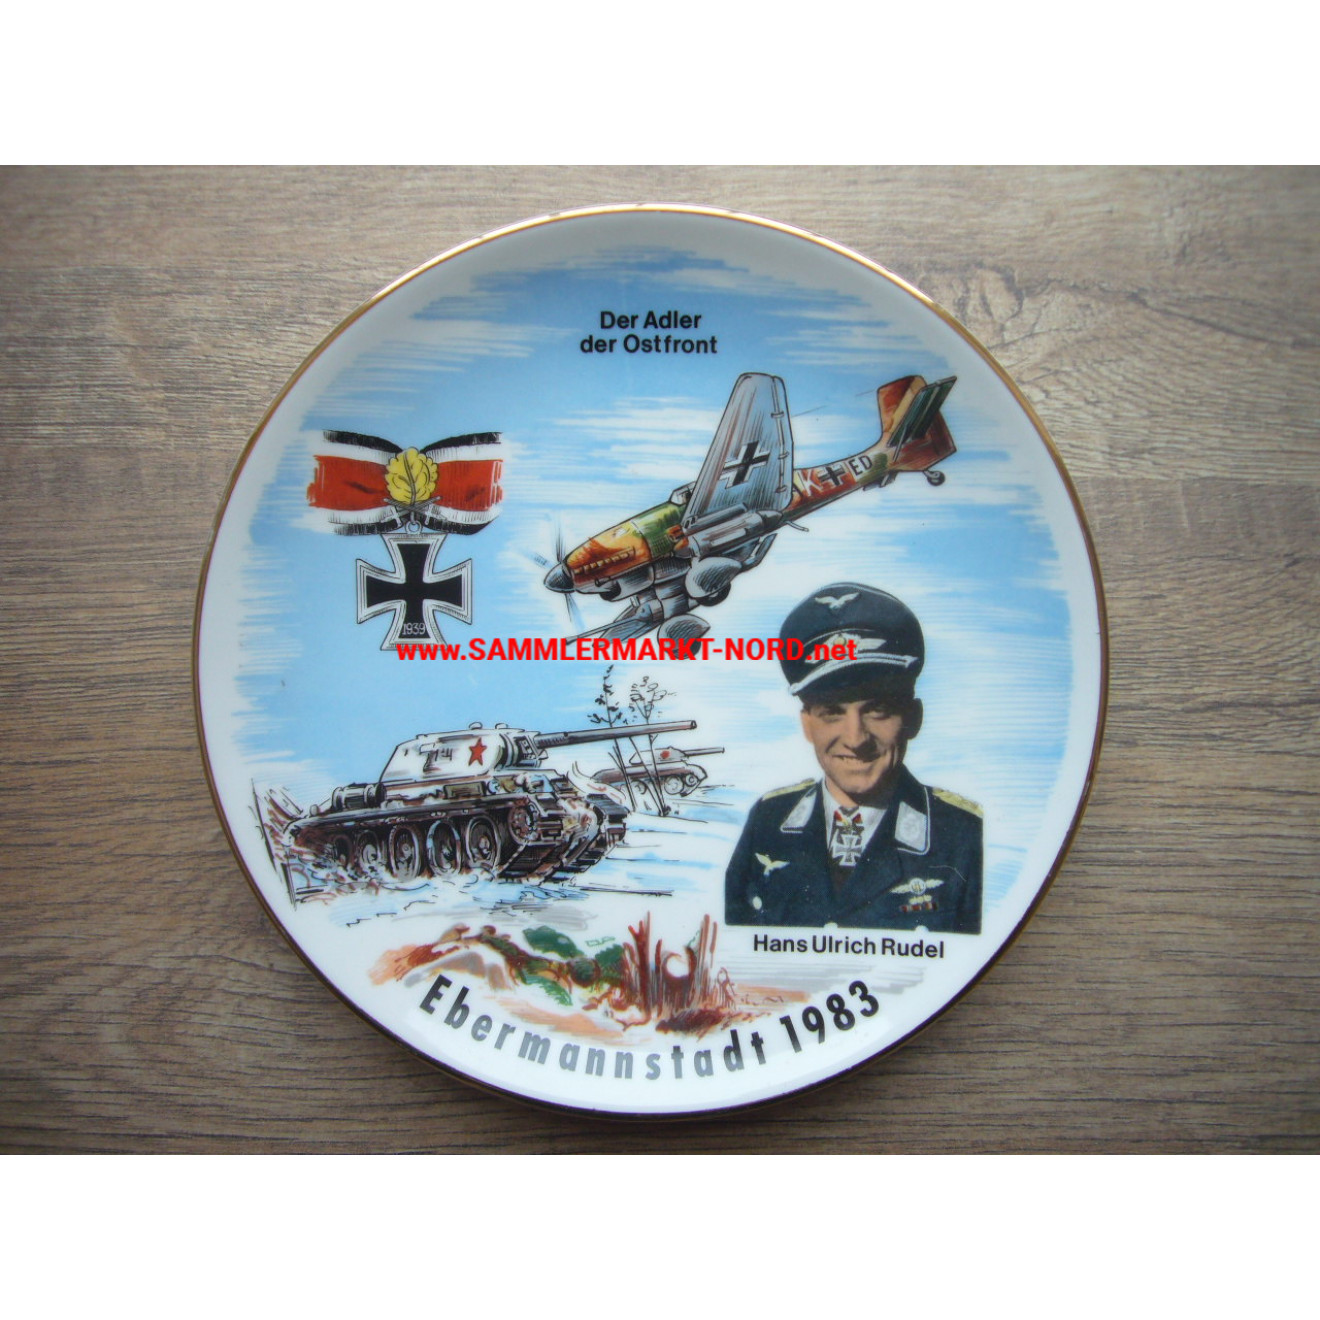 Luftwaffe - Hans-Ulrich Rudel - The Eagle of the Eastern Front - Commemorative plate